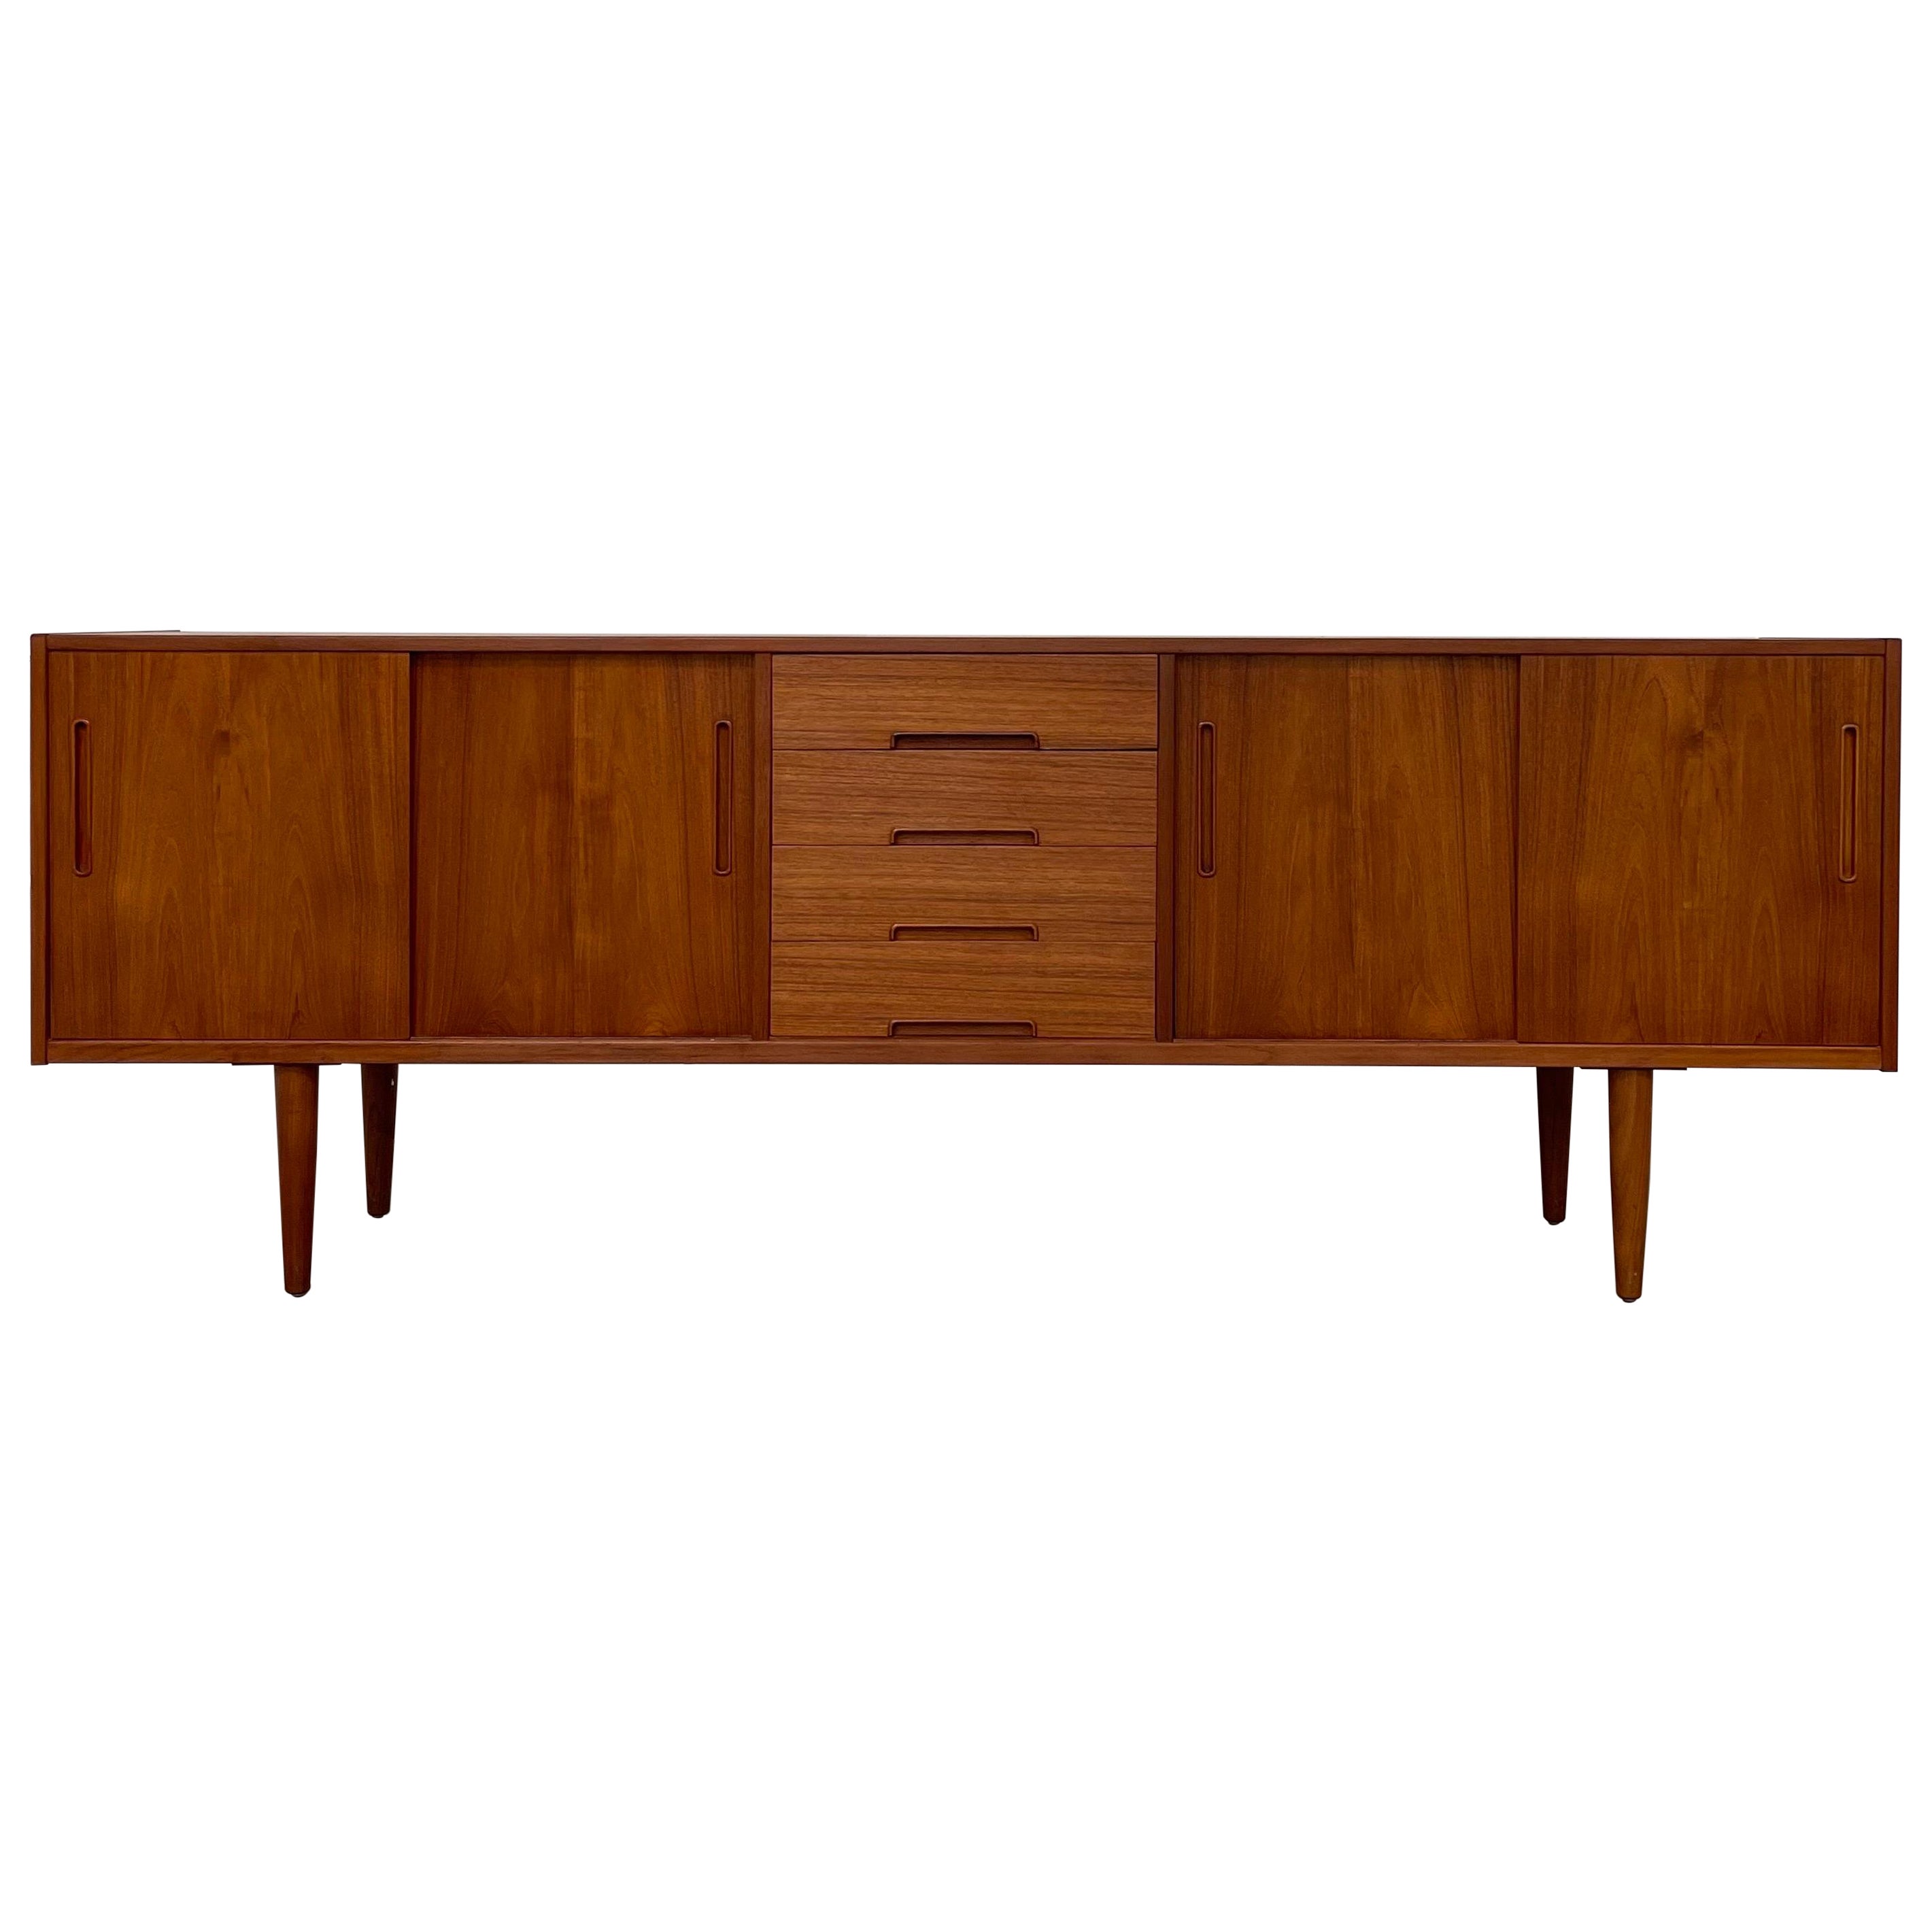 Troeds "Gigant" Sideboard by Nils Jonsson c. 1960s